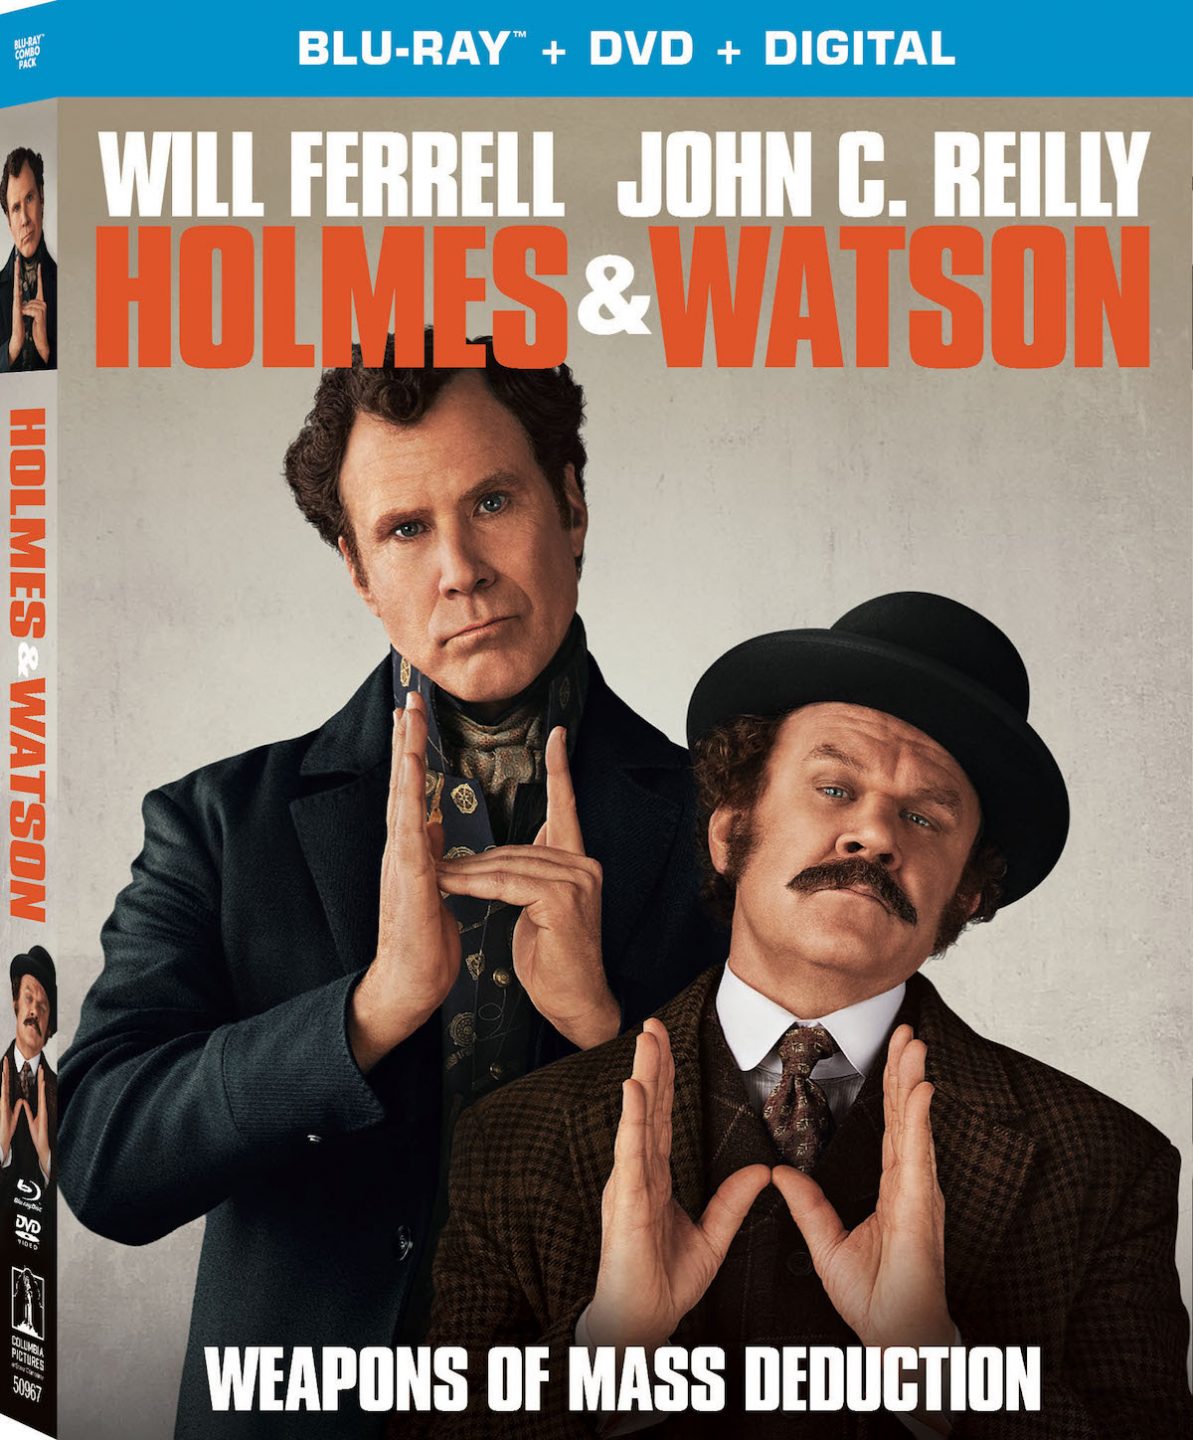 Holmes & Watson Blu-Ray Combo Pack cover (Sony Pictures Home Entertainment)